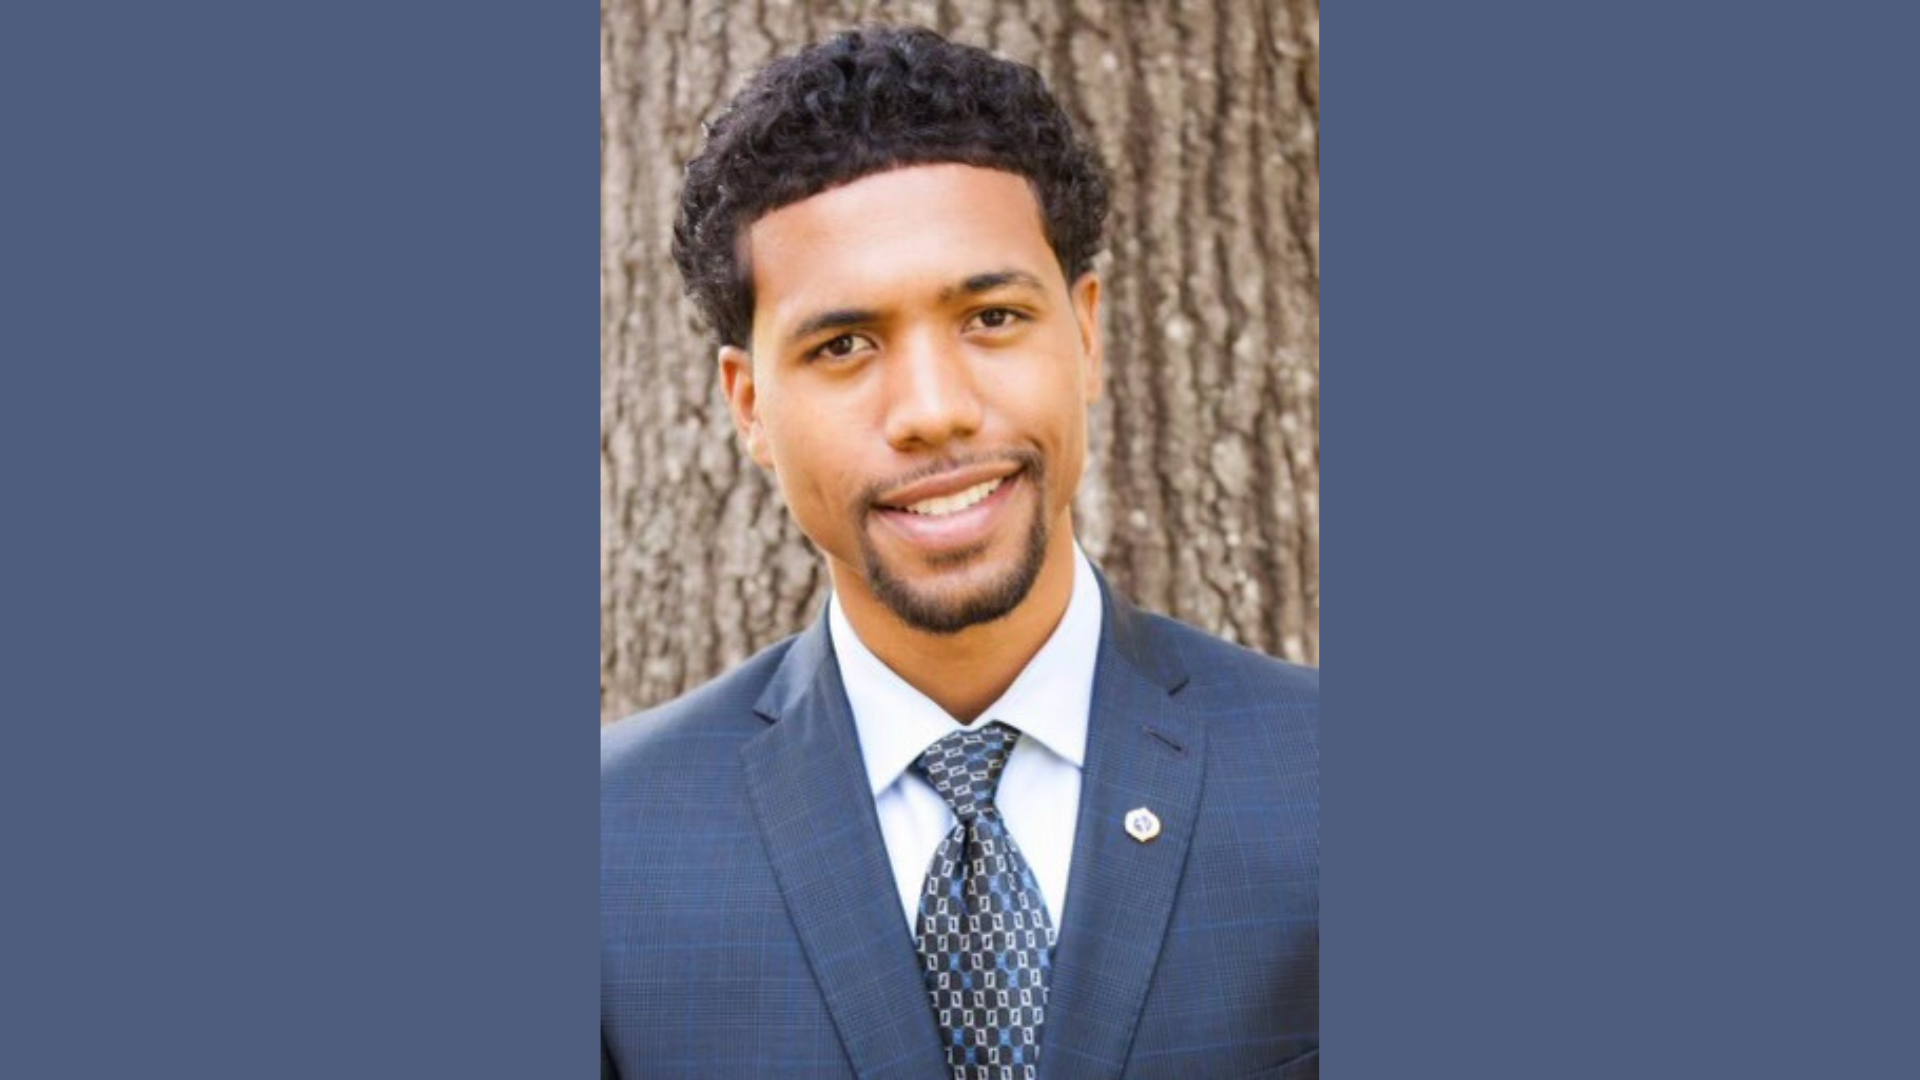 Empowering Atlanta's Youth: A Conversation with Founder of the Young Generation Movement